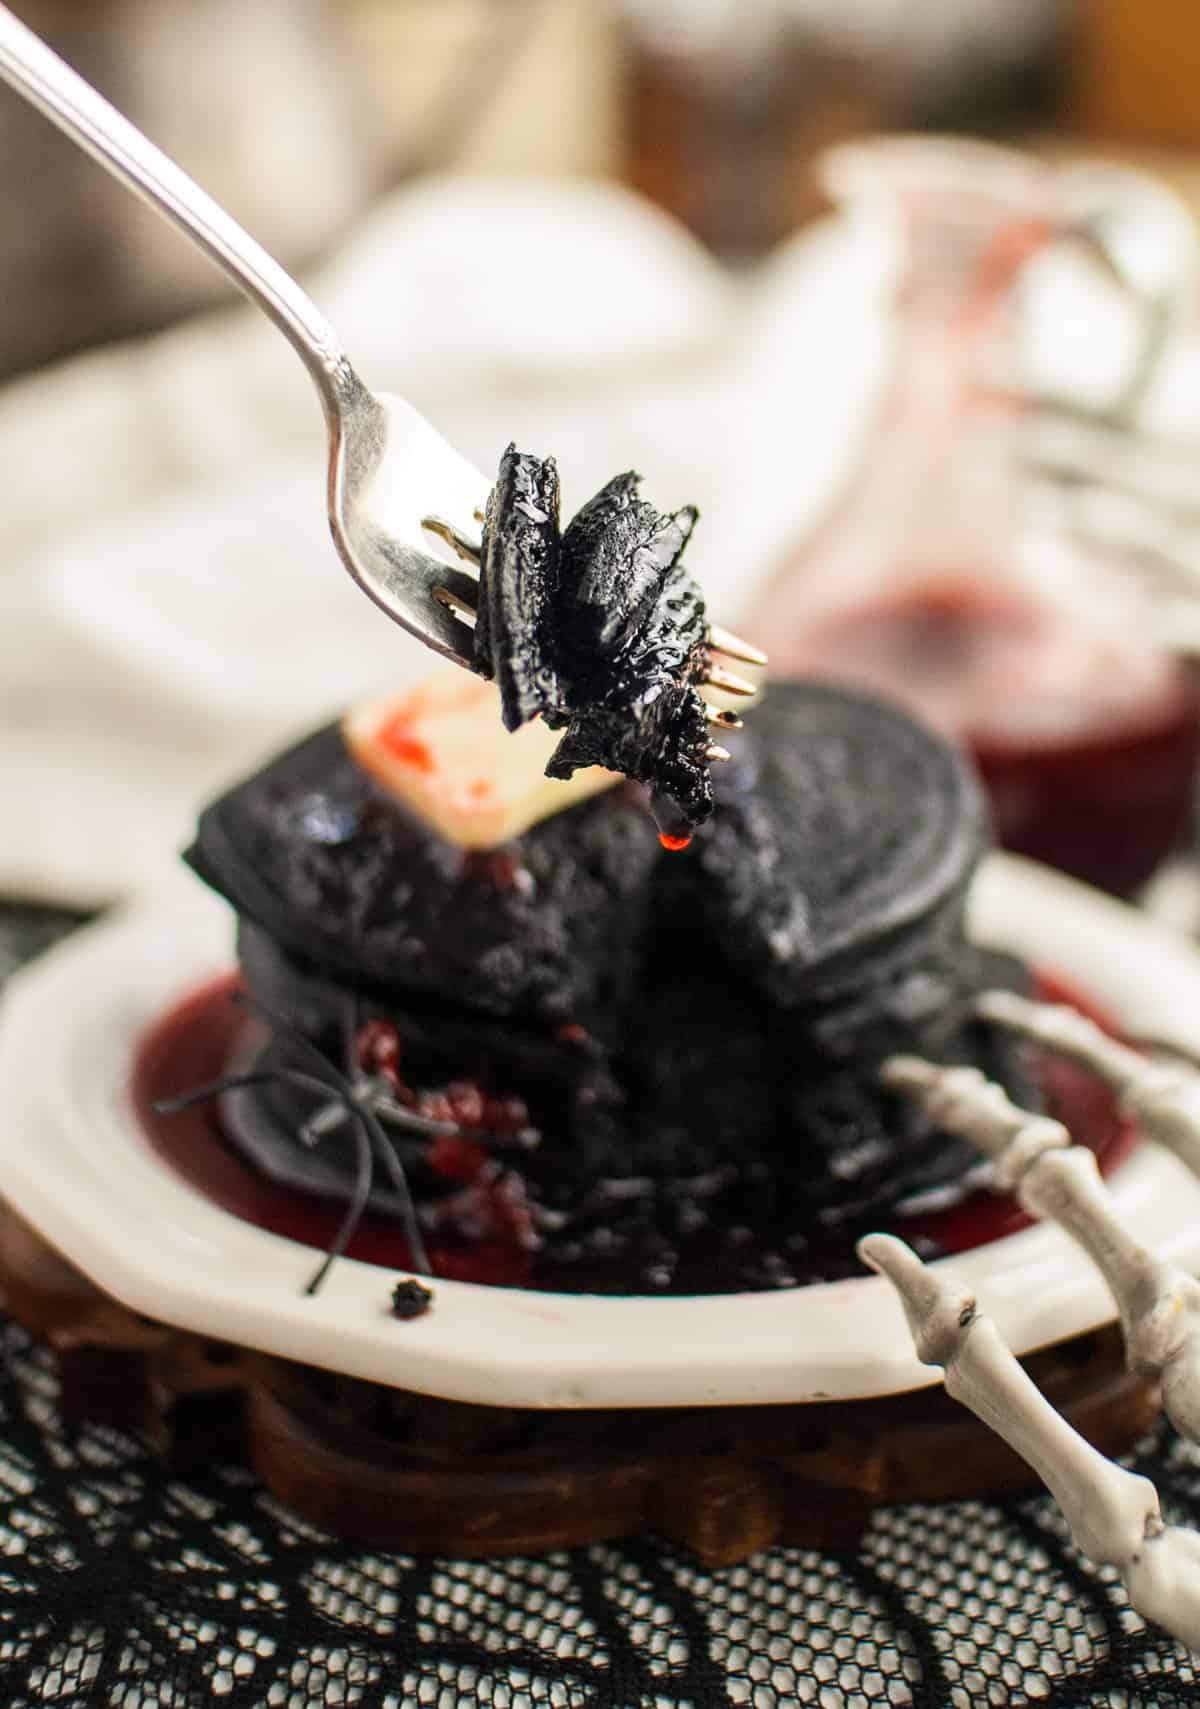 Black pancakes on a fork, a skeleton hand in the foreground.